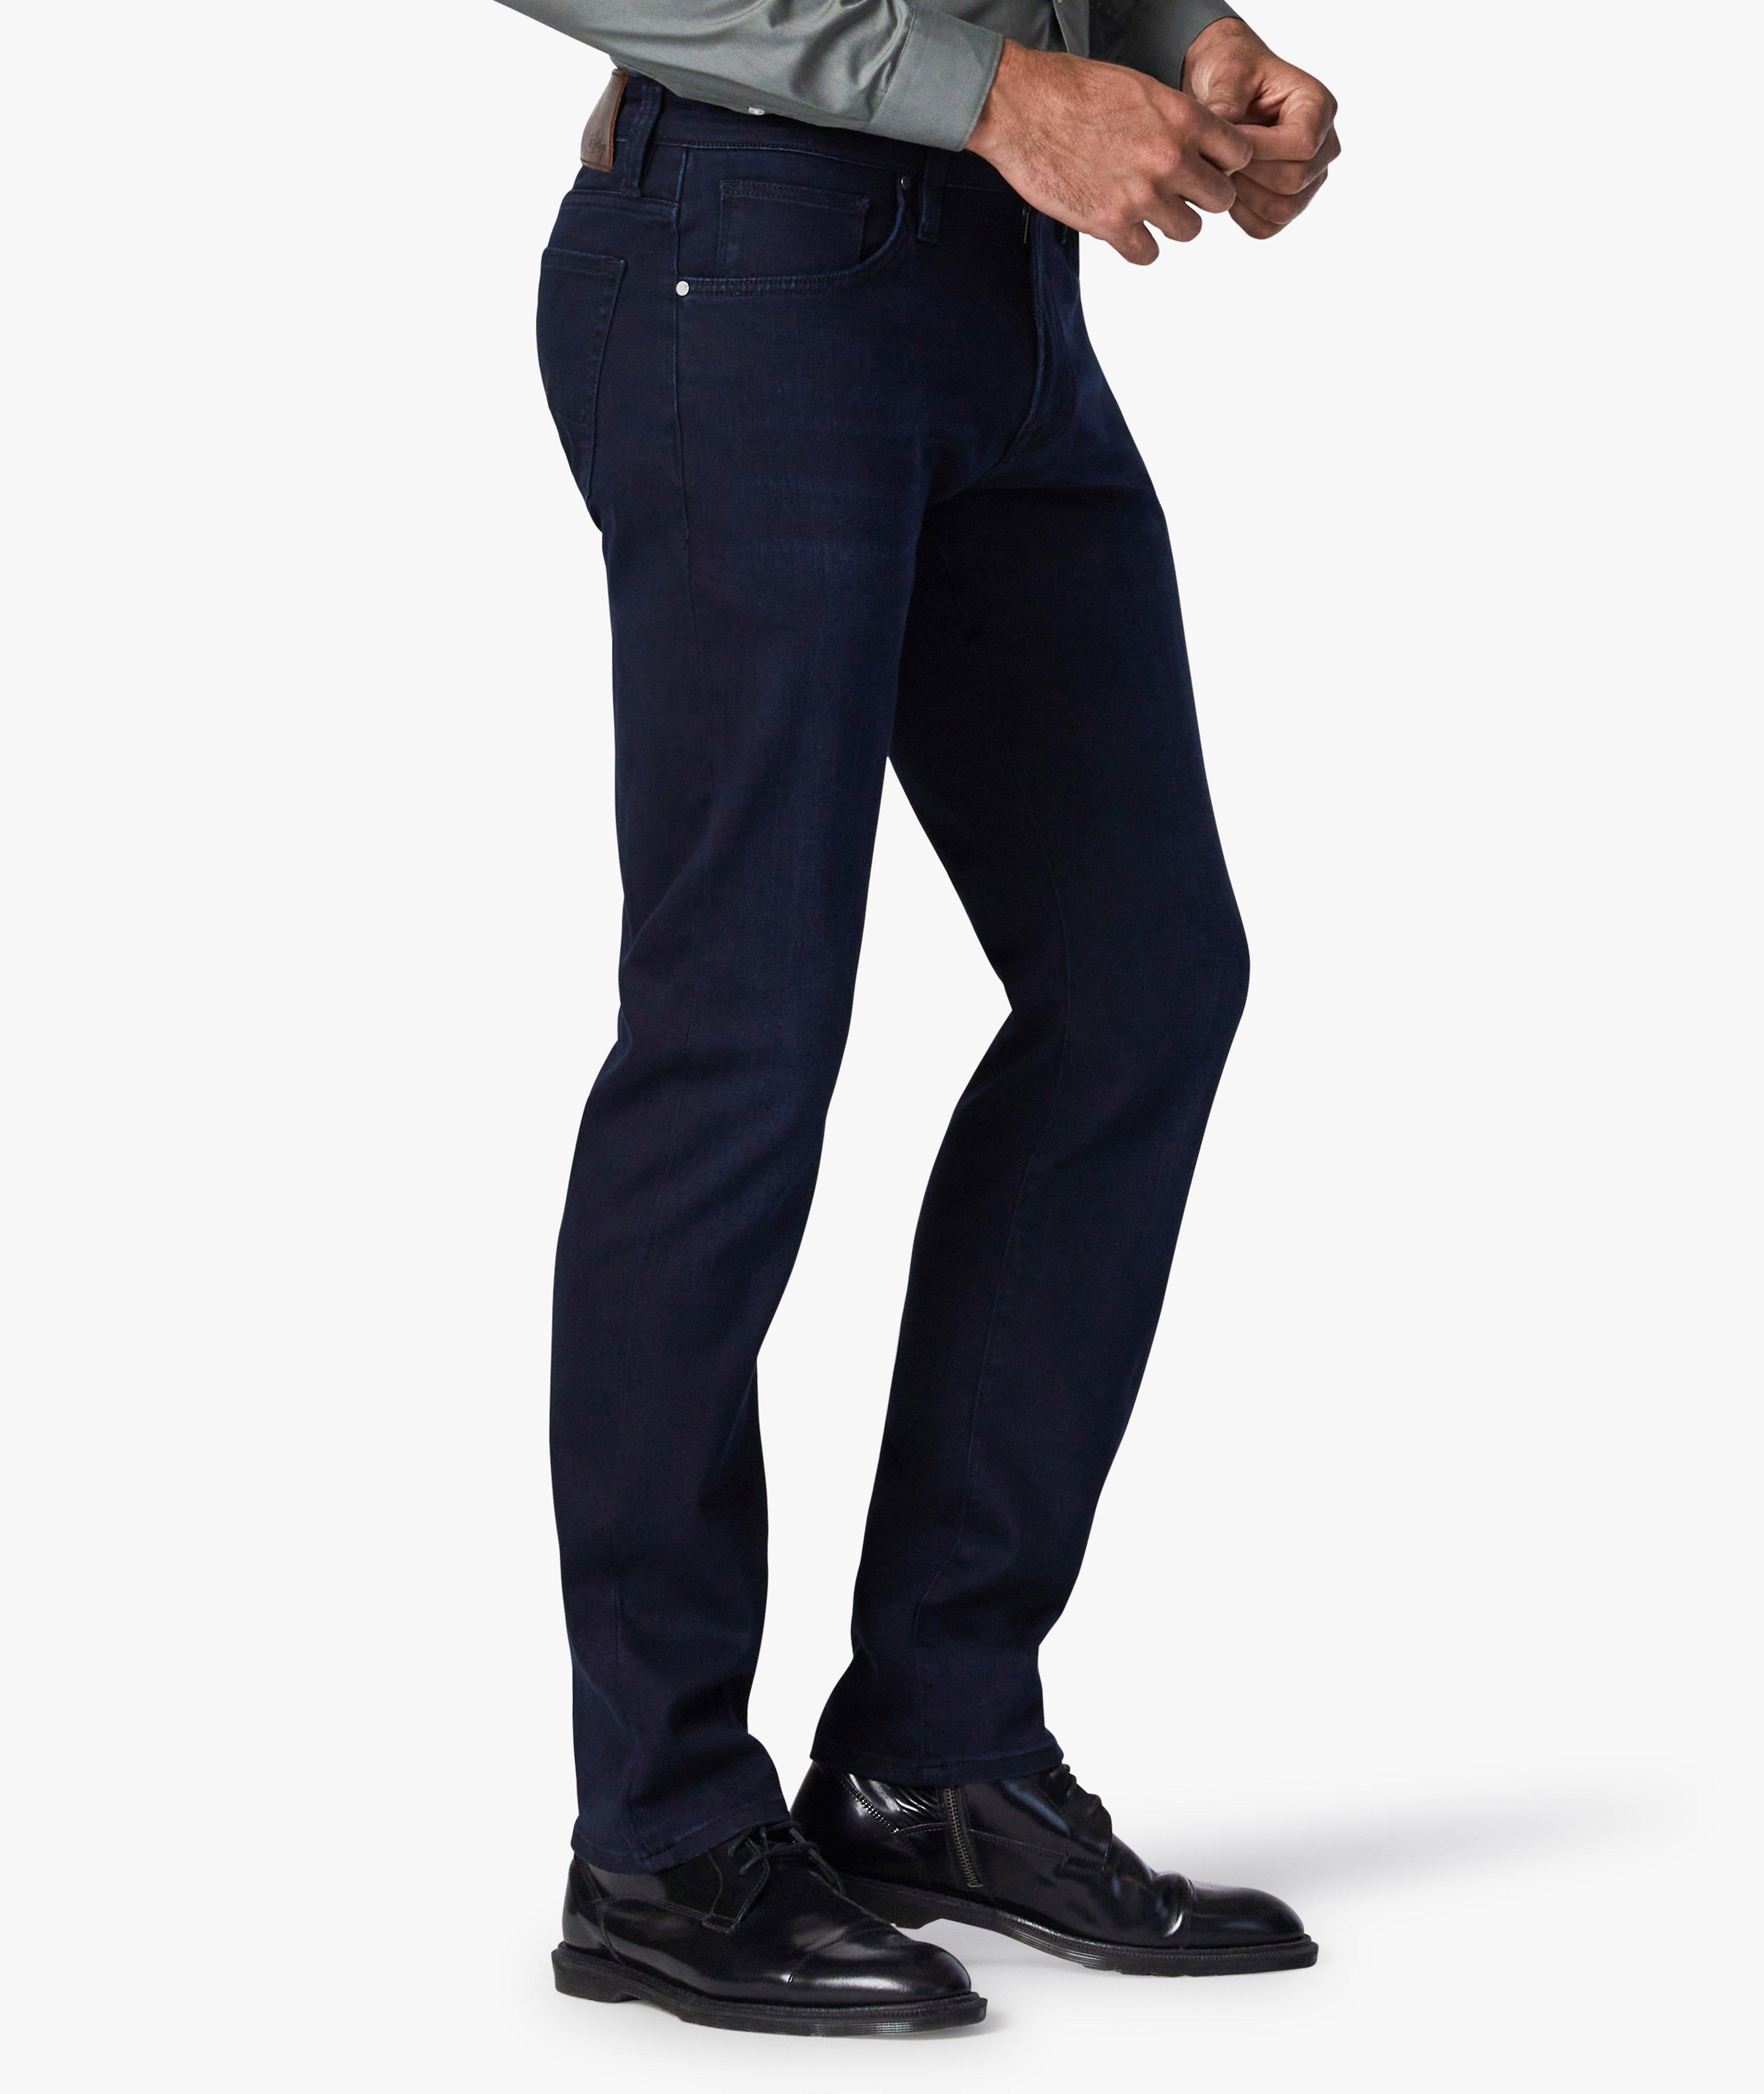 Cool Tapered Leg Jeans image 1